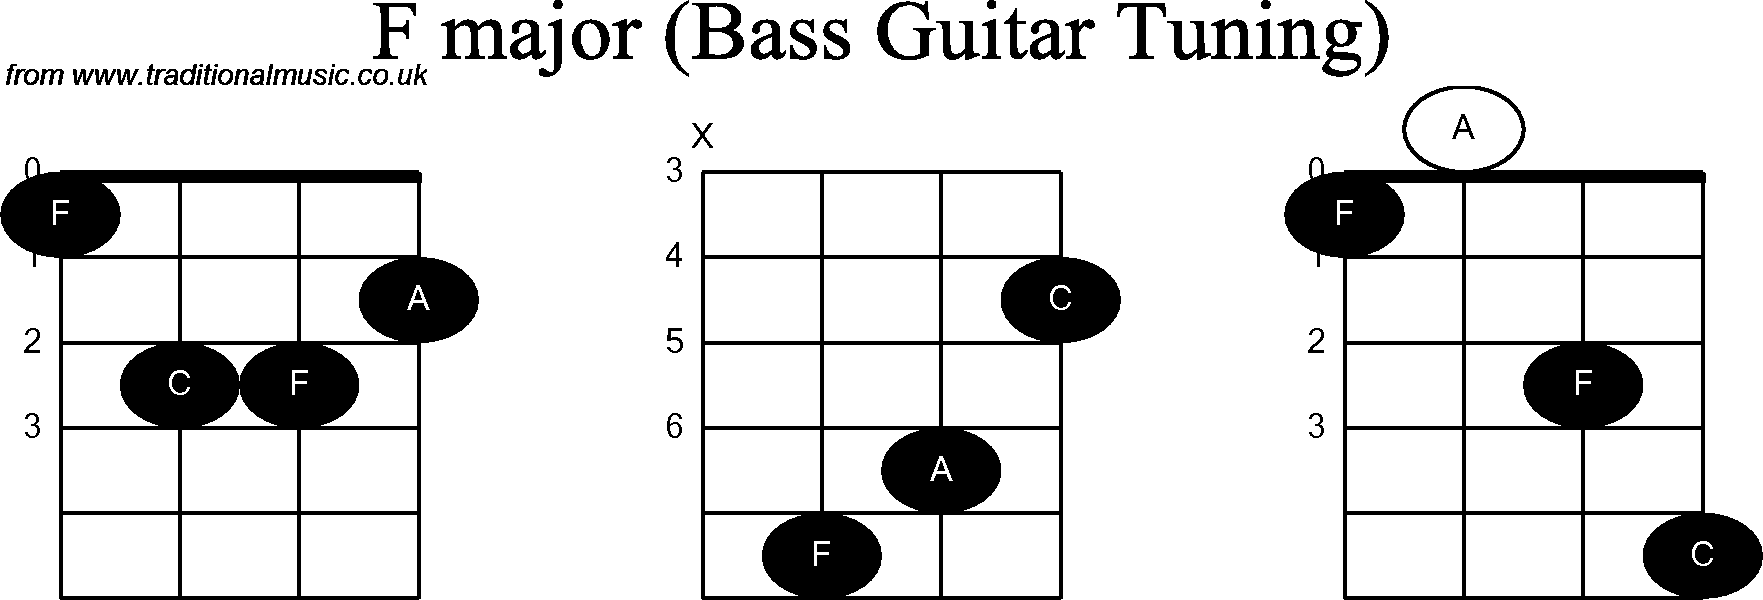 Bass Guitar chord charts for: F